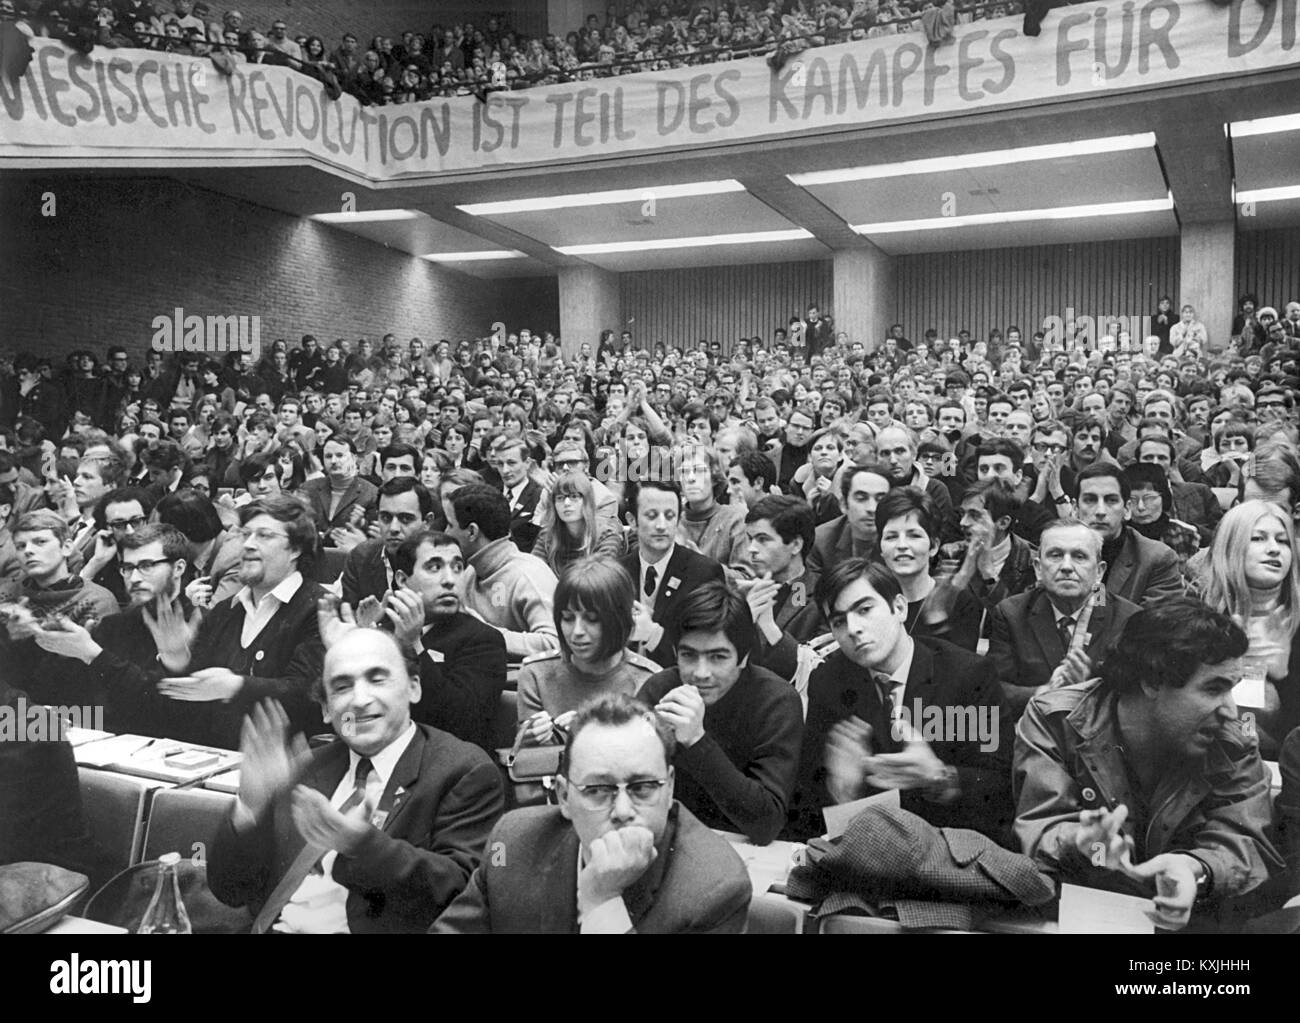 View into the crowded Auditorium Maximum of the Technische Universität in Berlin on February 17,1968 during the 'International Vietnam Conference'. Almost 3,000 people accepted the invitation of the Socialist German Student Union (SDS) and numerous left-wing socialist youth organizations. In the crowded Auditorium Maximum, the predominantly student audience gathered in front of a large Vietkong flag. Hundreds of participants had settled down in front of the hall due to a lack of space. | usage worldwide Stock Photo